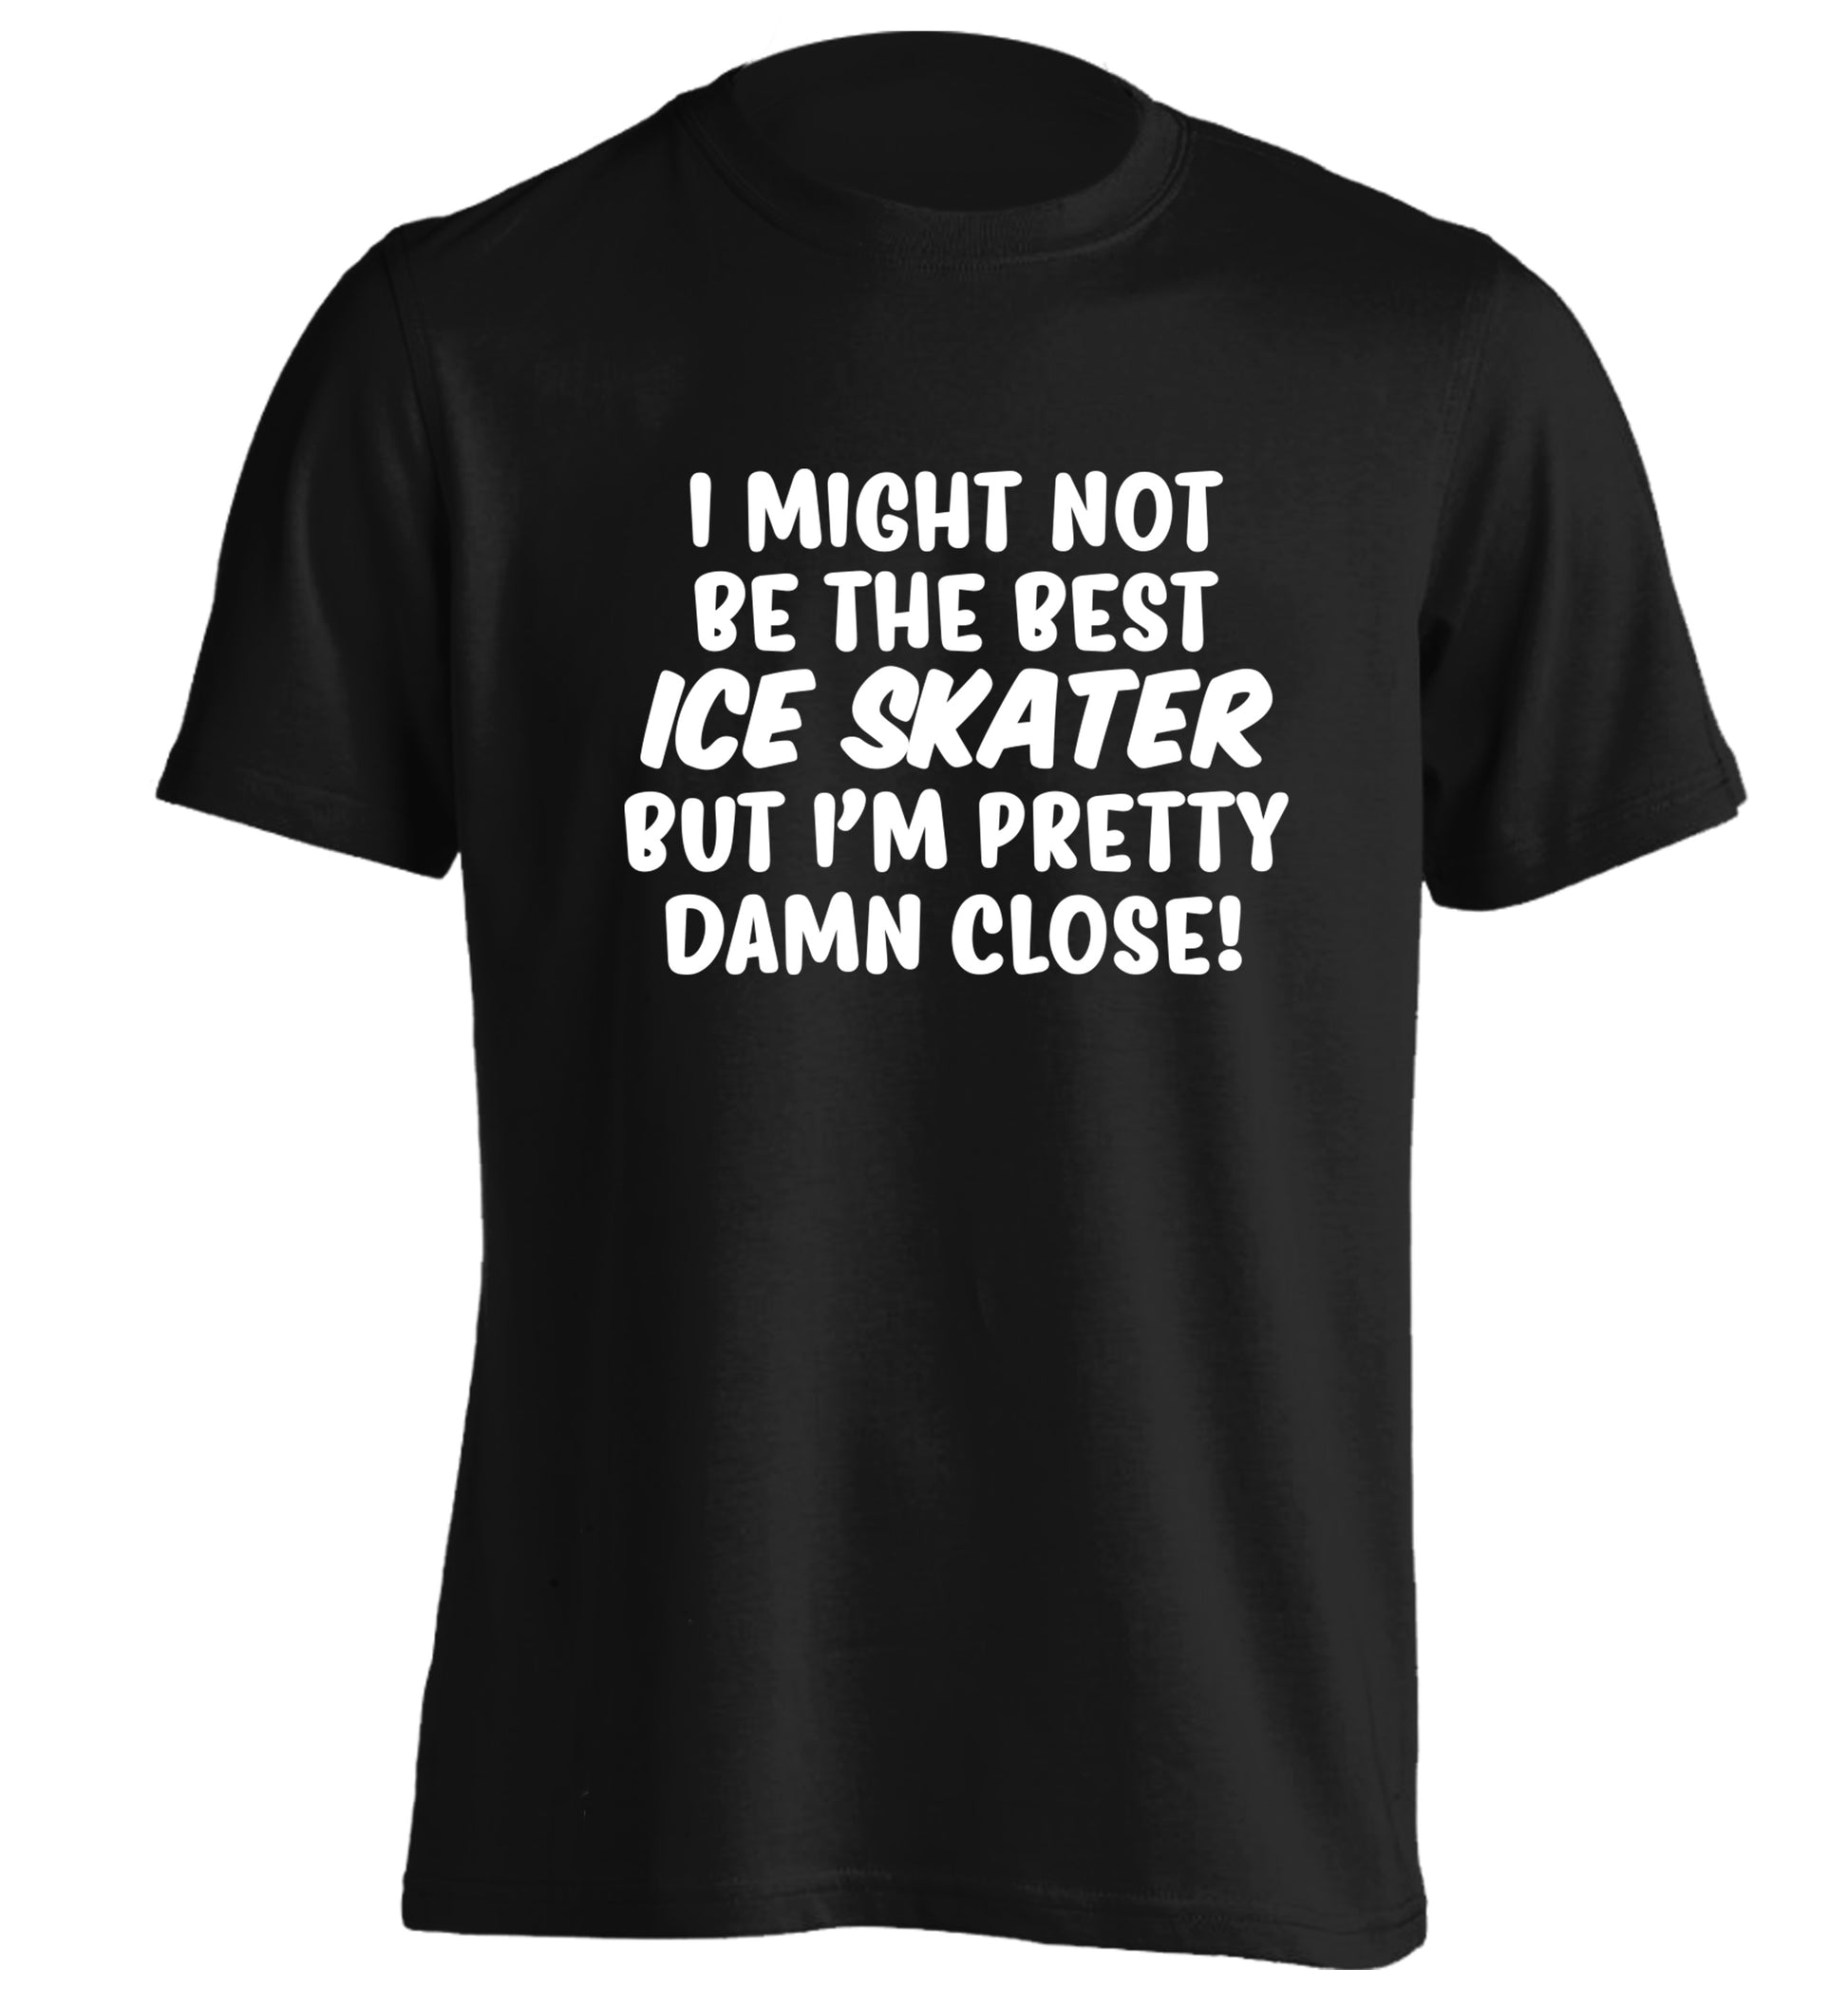 I might not be the best ice skater but I'm pretty damn close! adults unisexblack Tshirt 2XL